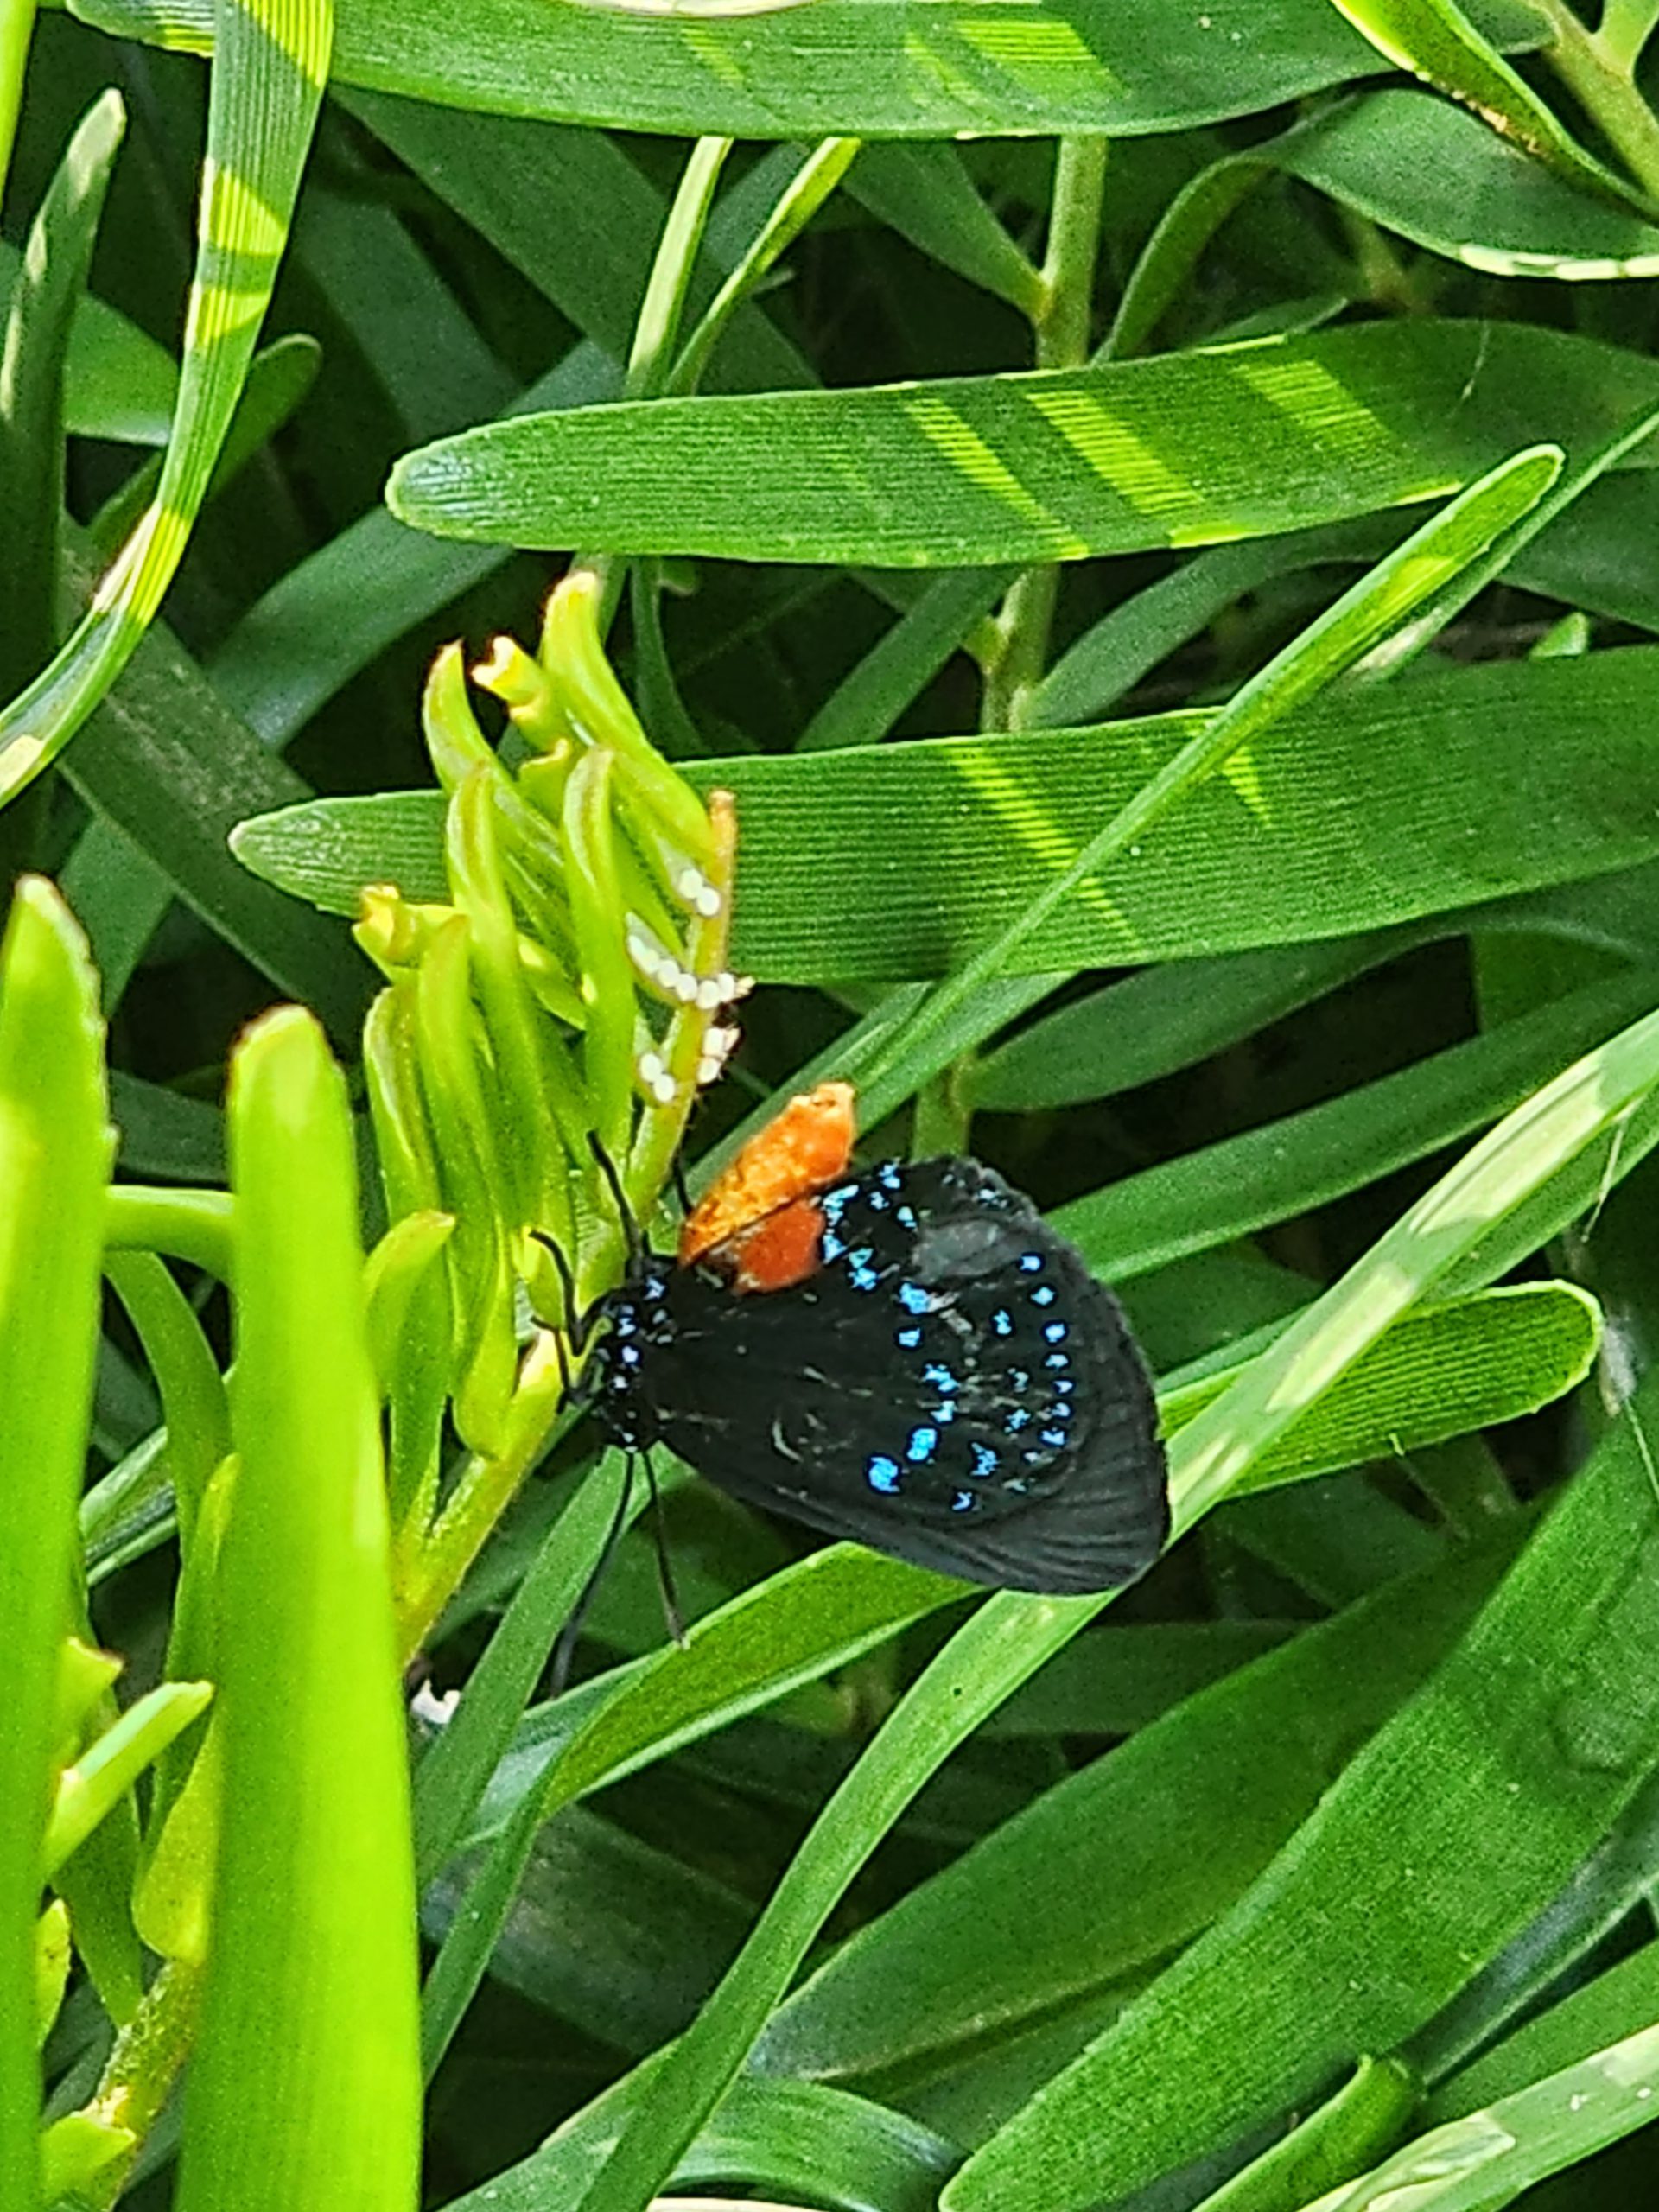 Atala laying eggs on a coontie plant.